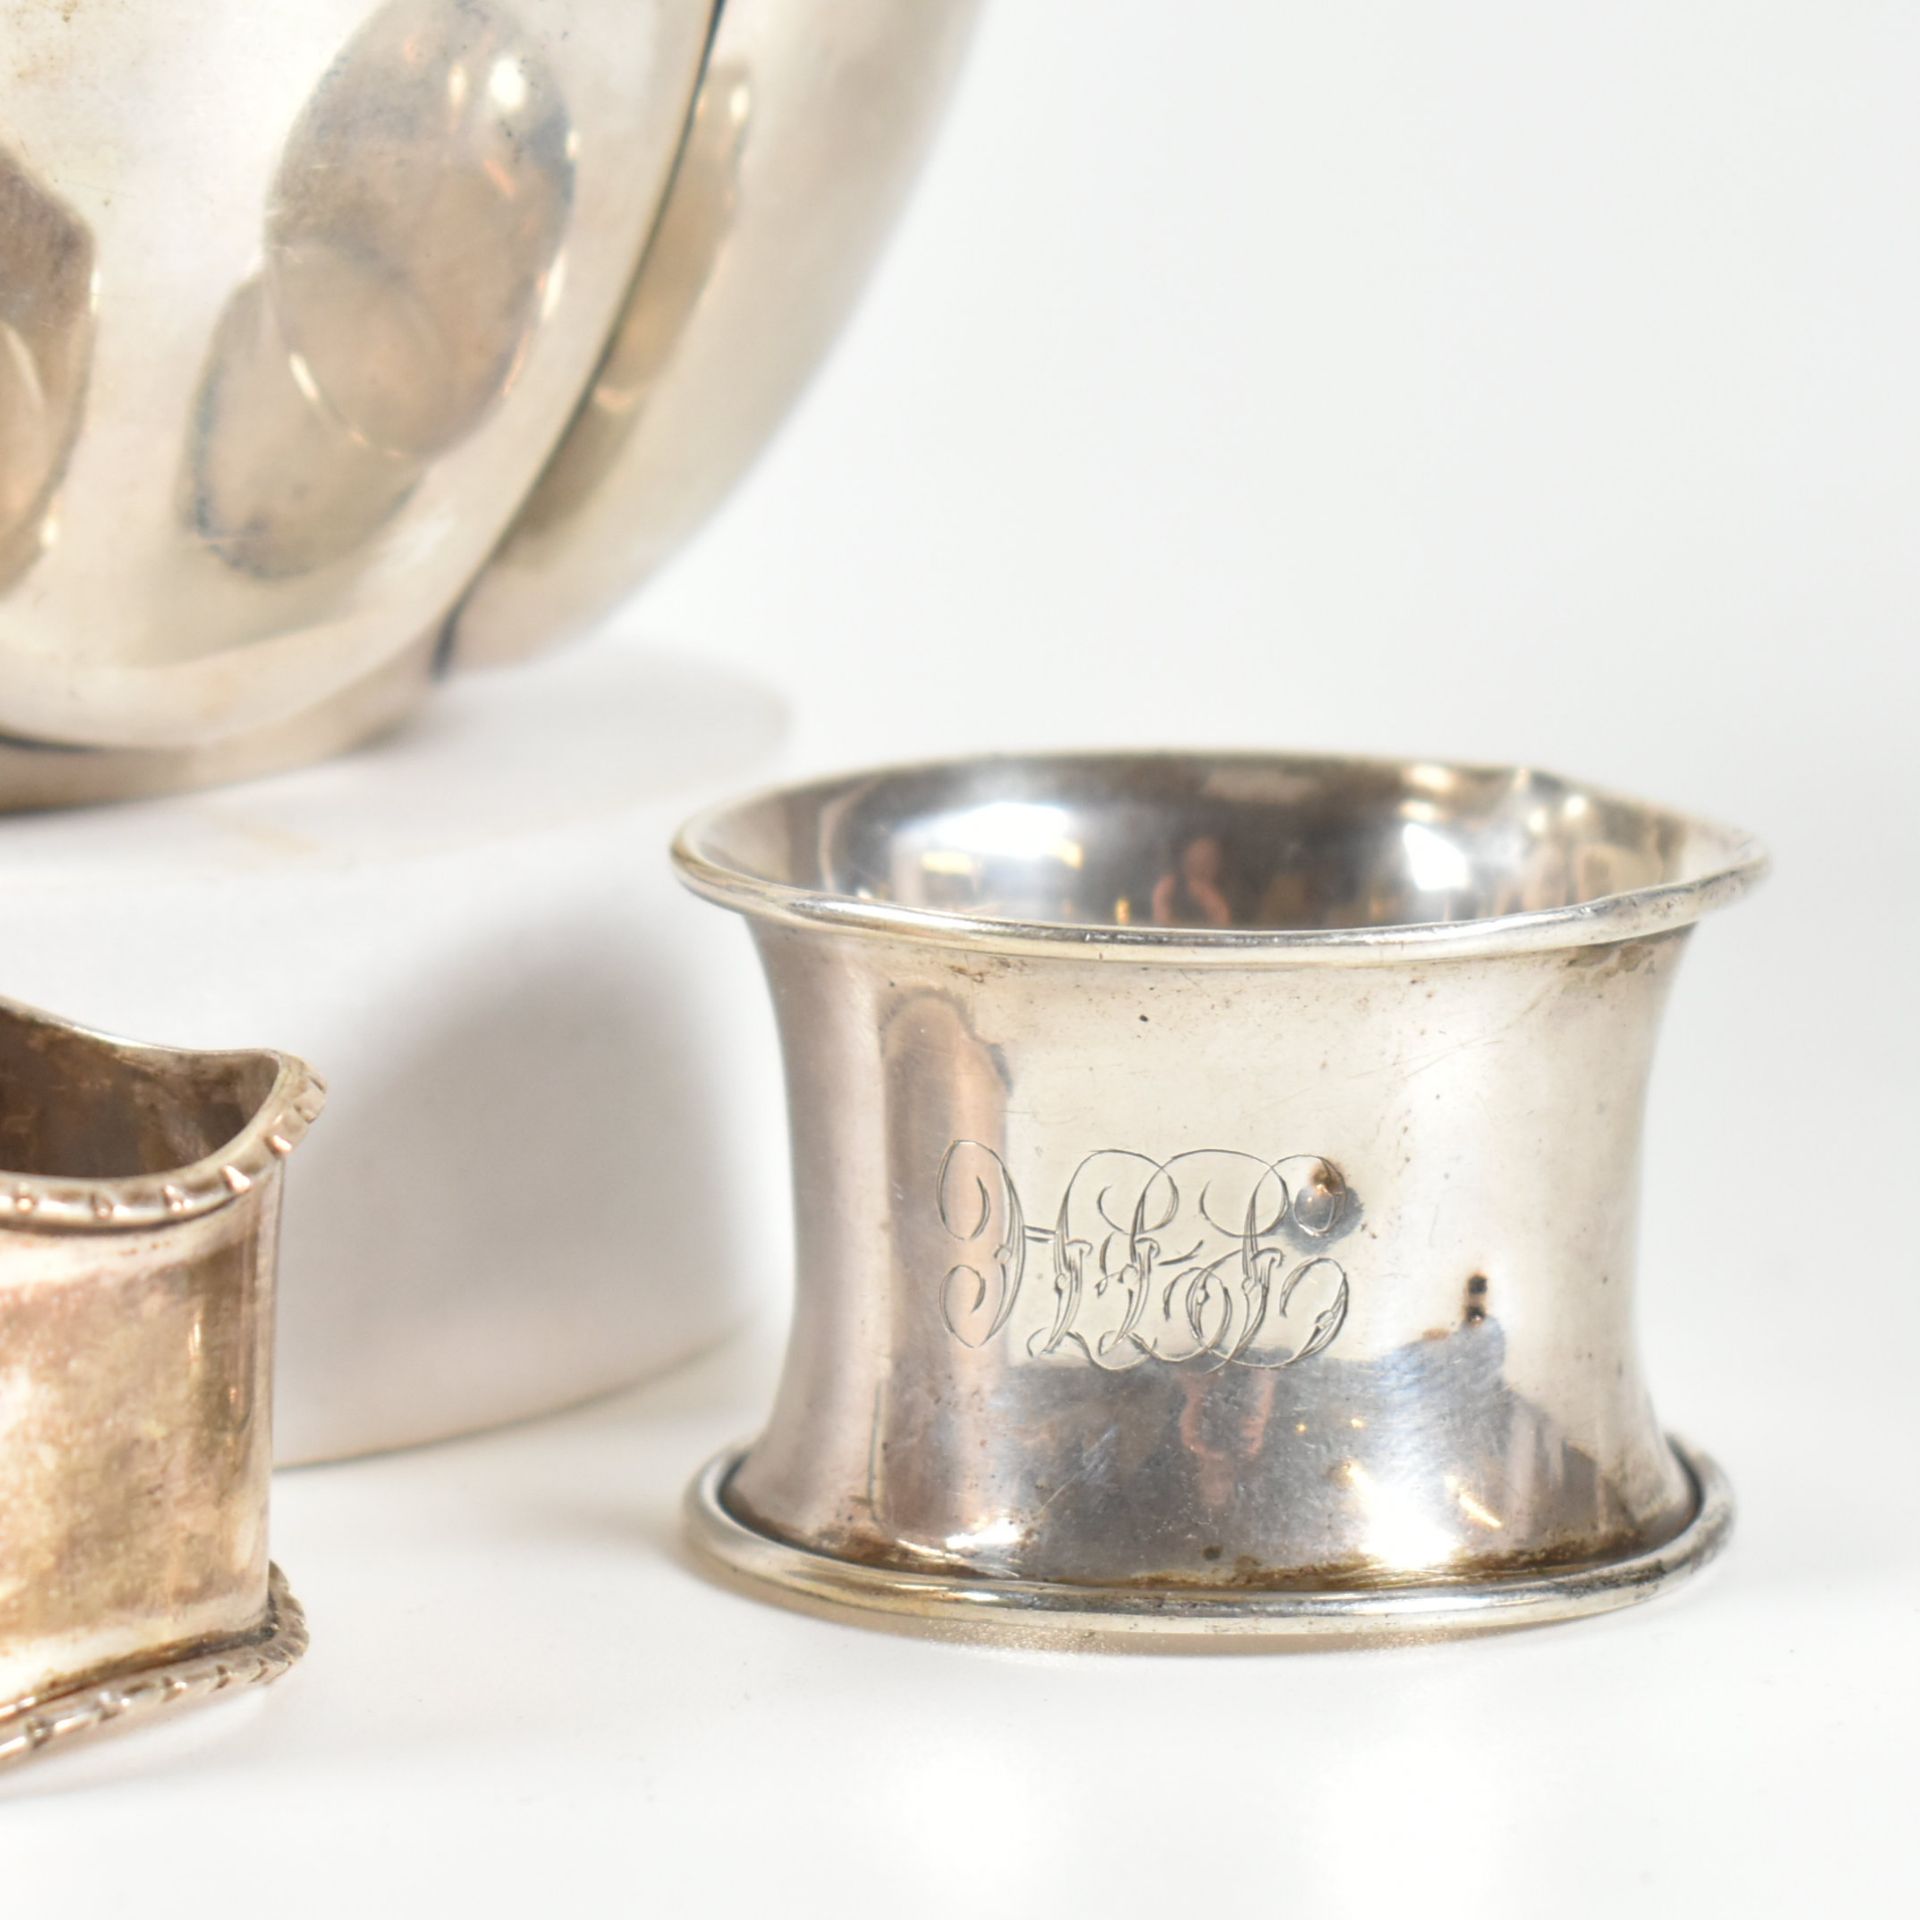 EDWARD VII HALLMARKED SILVER BOWL & OTHER NAPKIN RINGS - Image 2 of 6